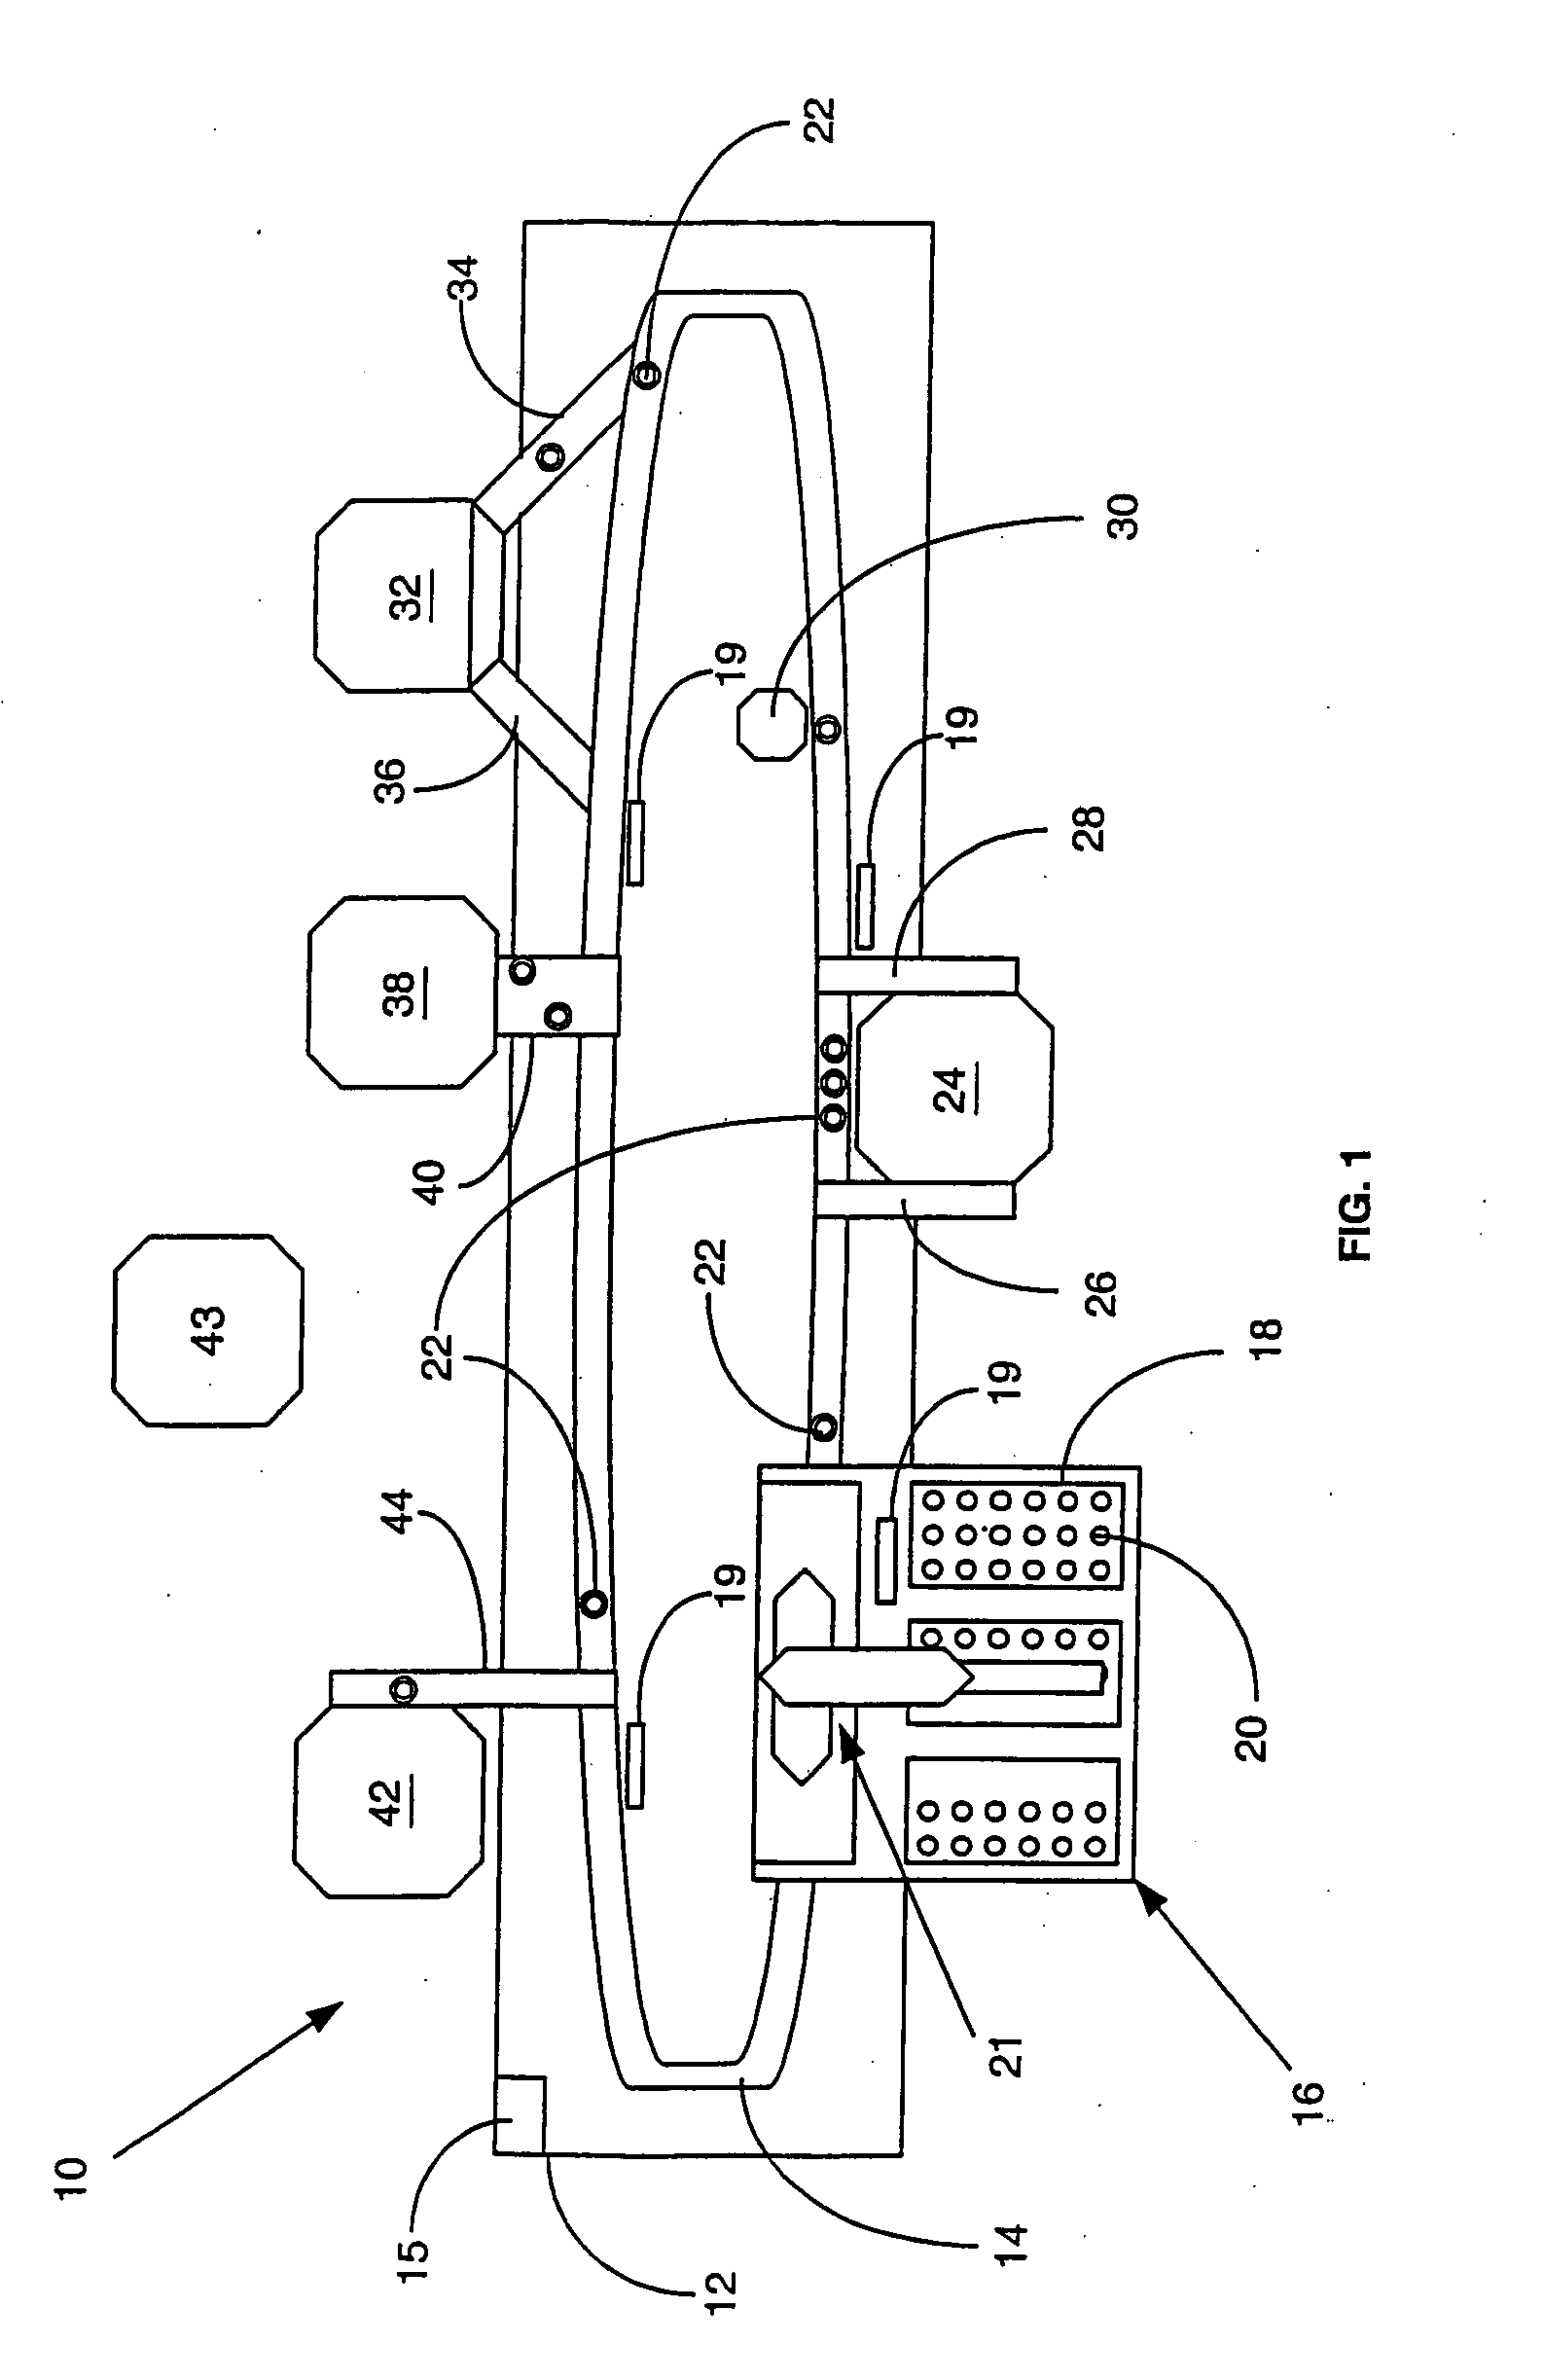 Method for processing chemistry and coagulation test samples in a laboratory workcell